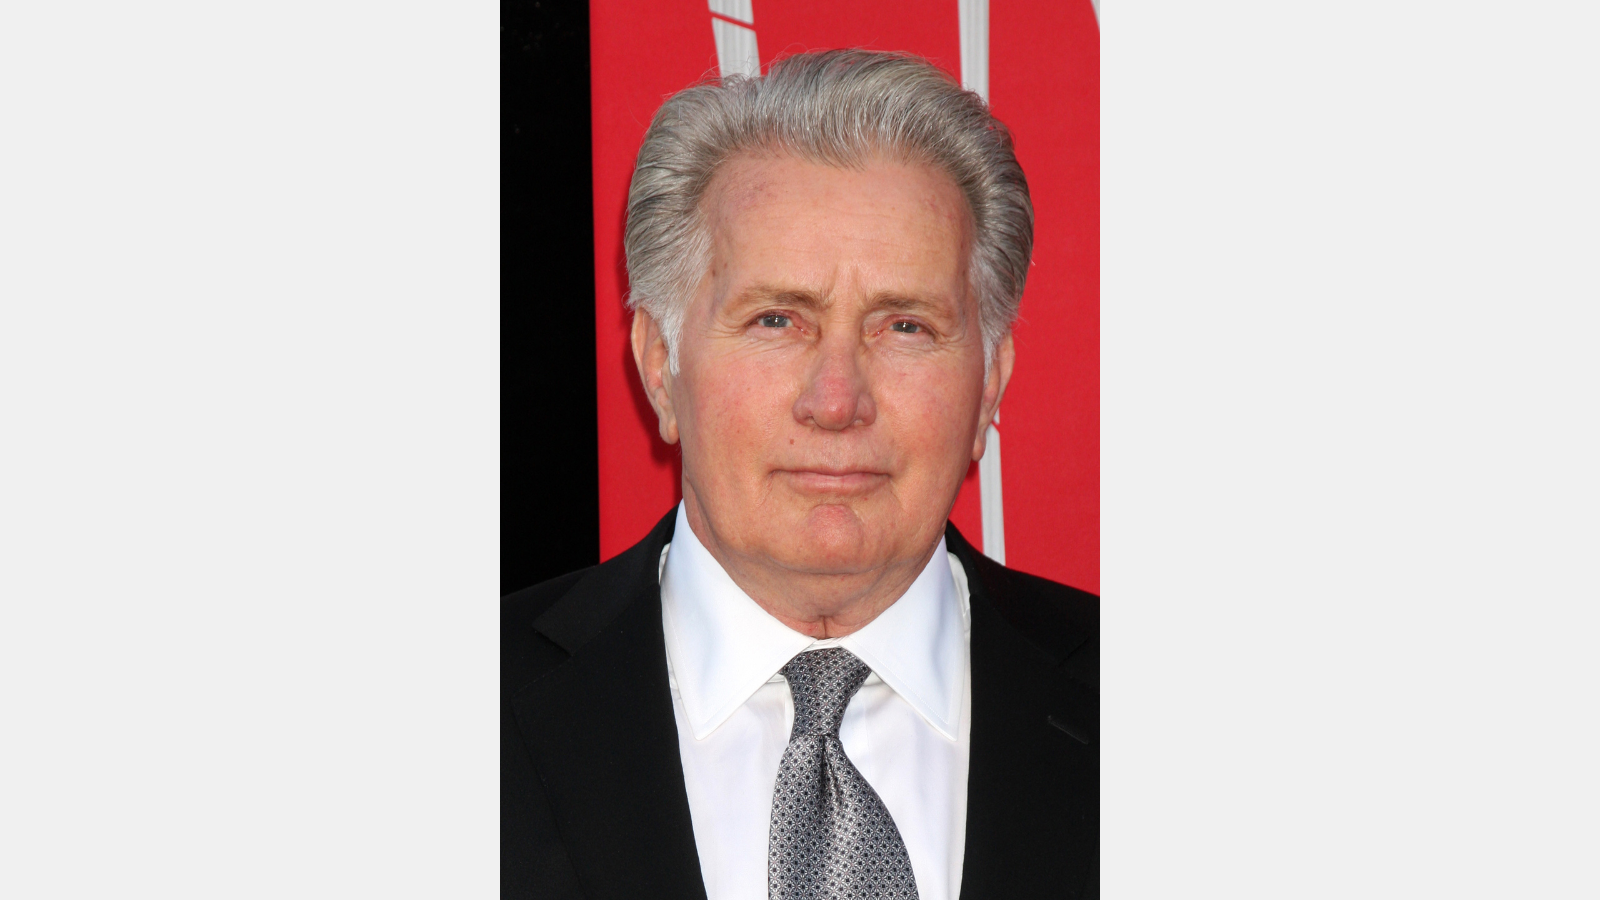 Martin Sheen in a suit in front of a red background.